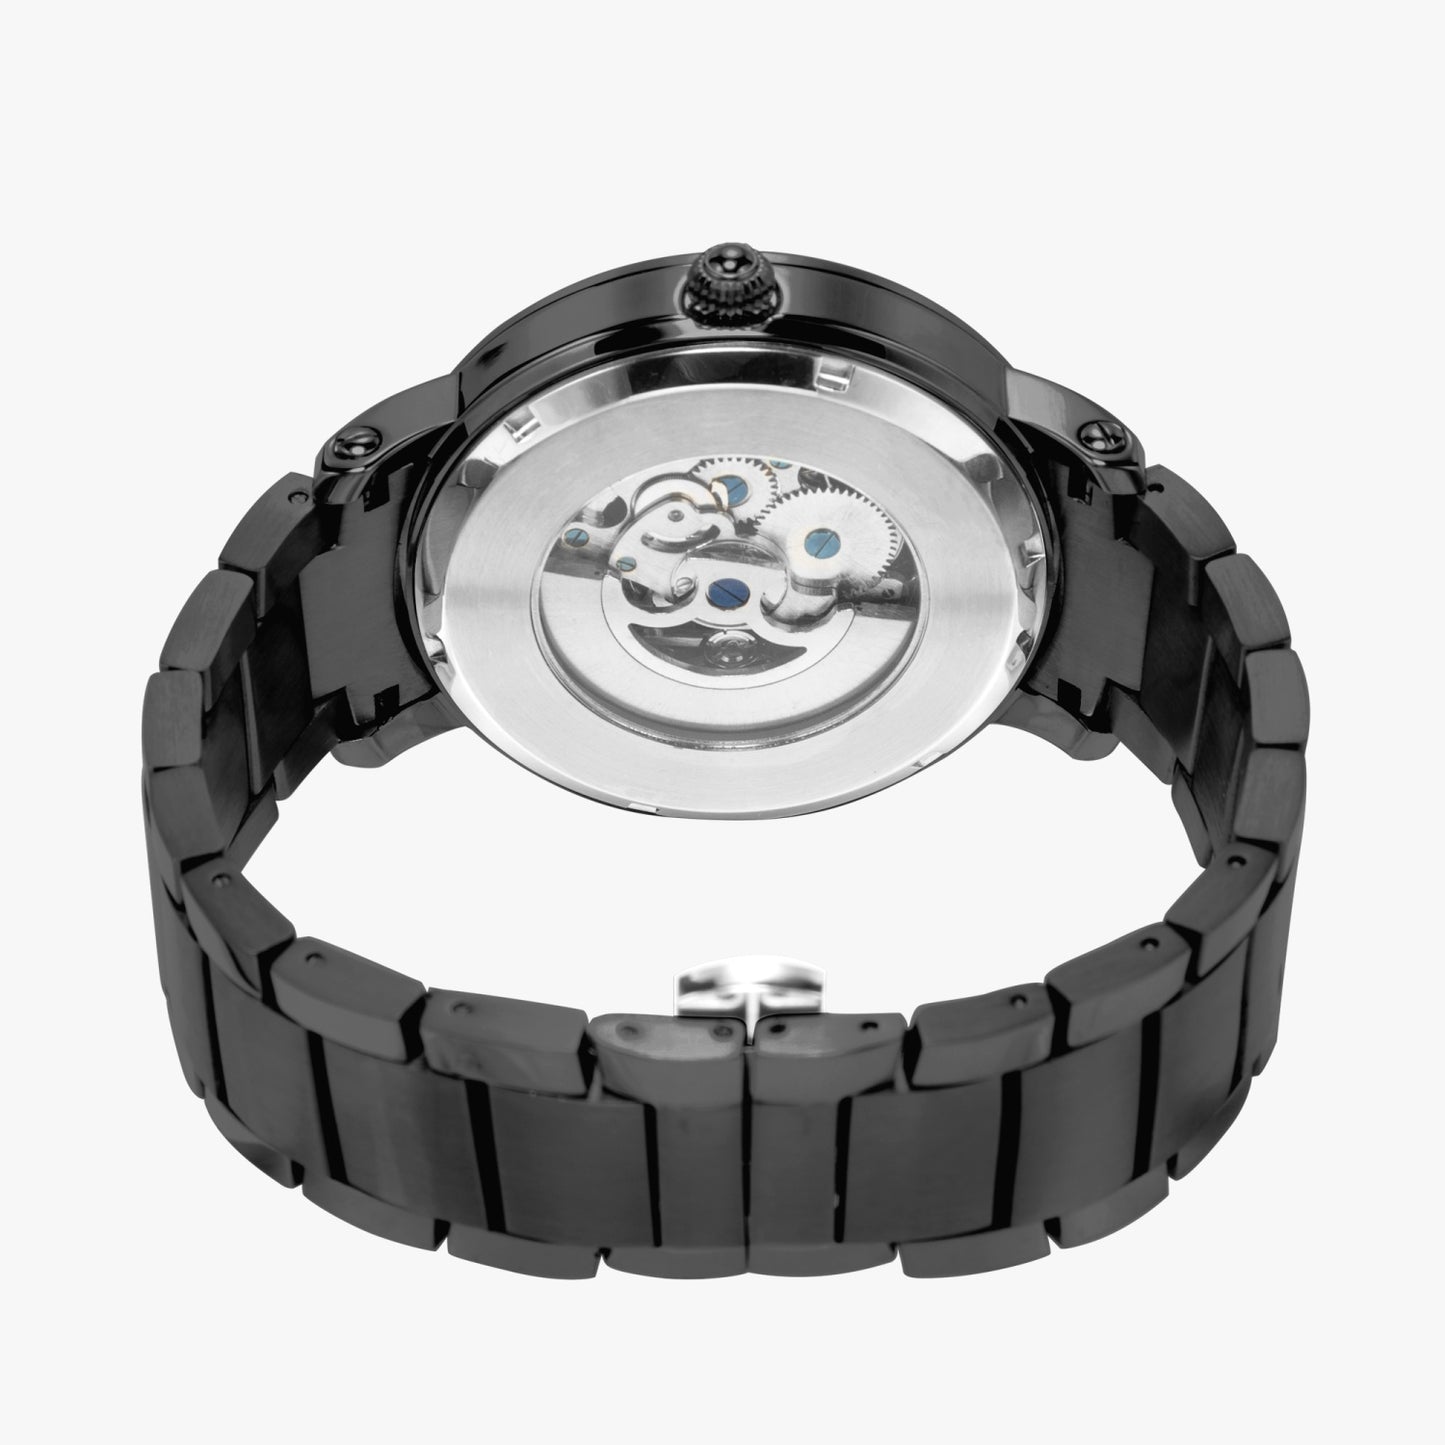 Inter Automatic Movement Watch - Premium Stainless Steel